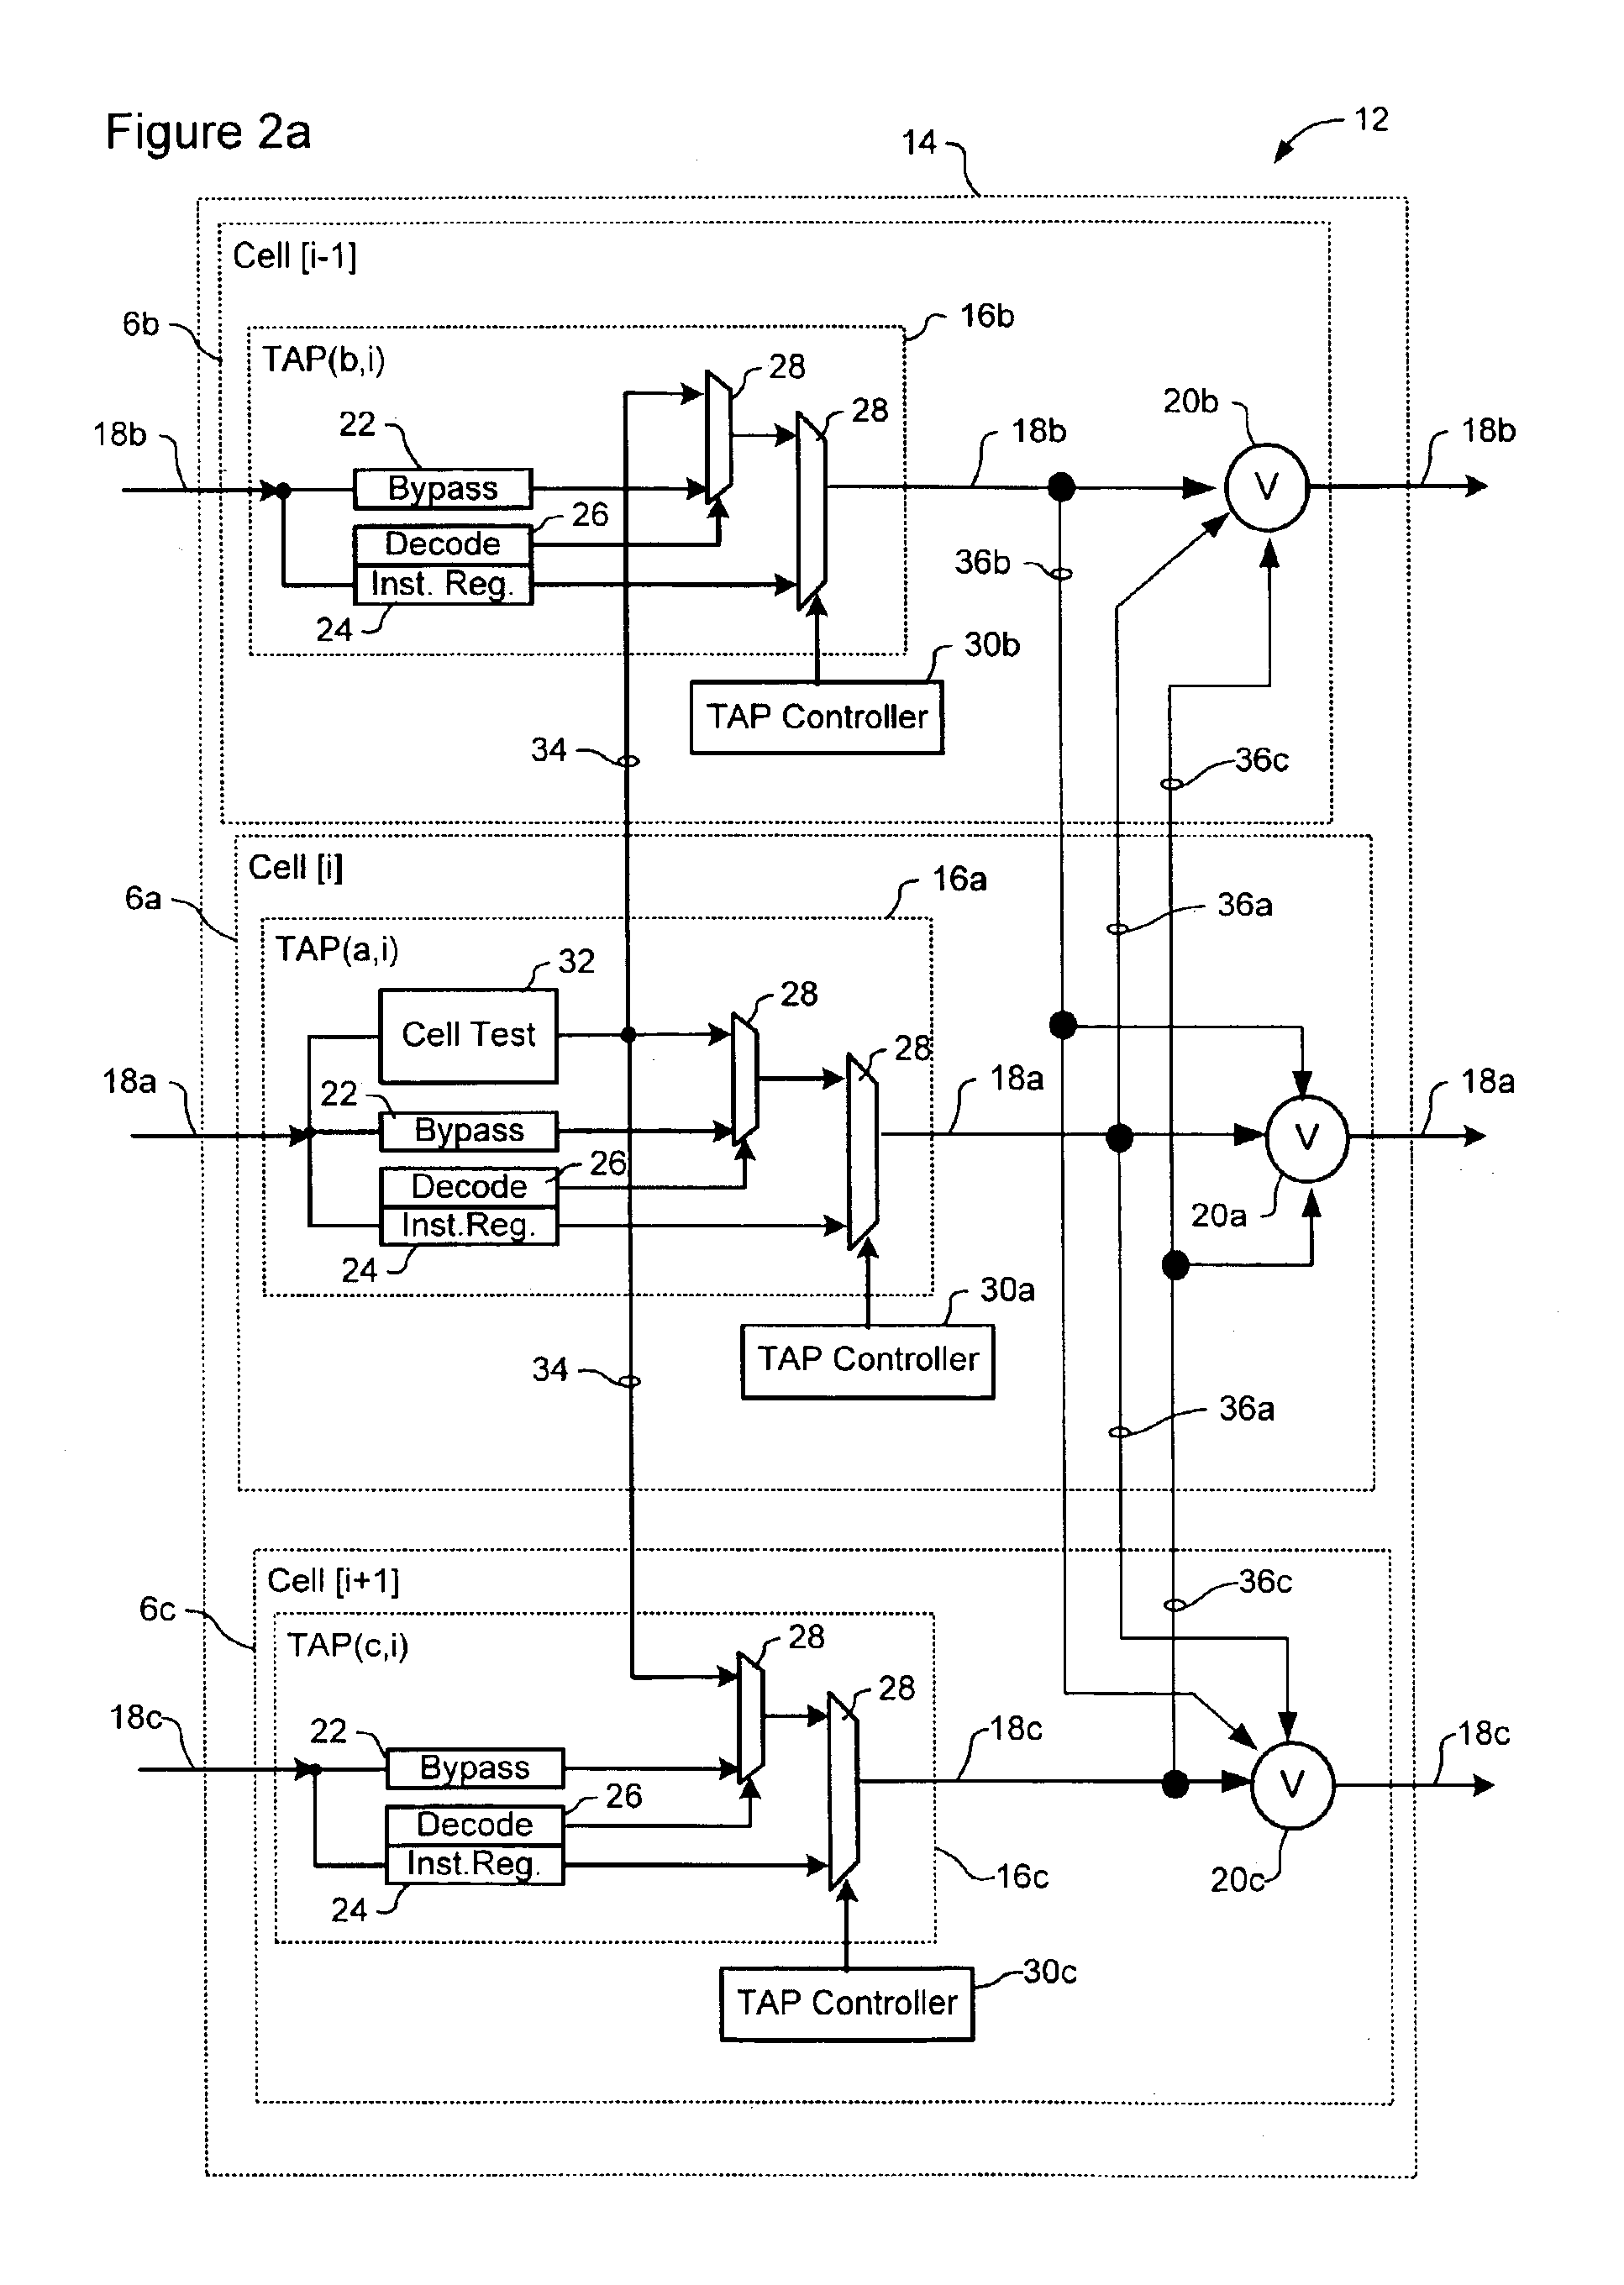 Fault tolerant scan chain for a parallel processing system